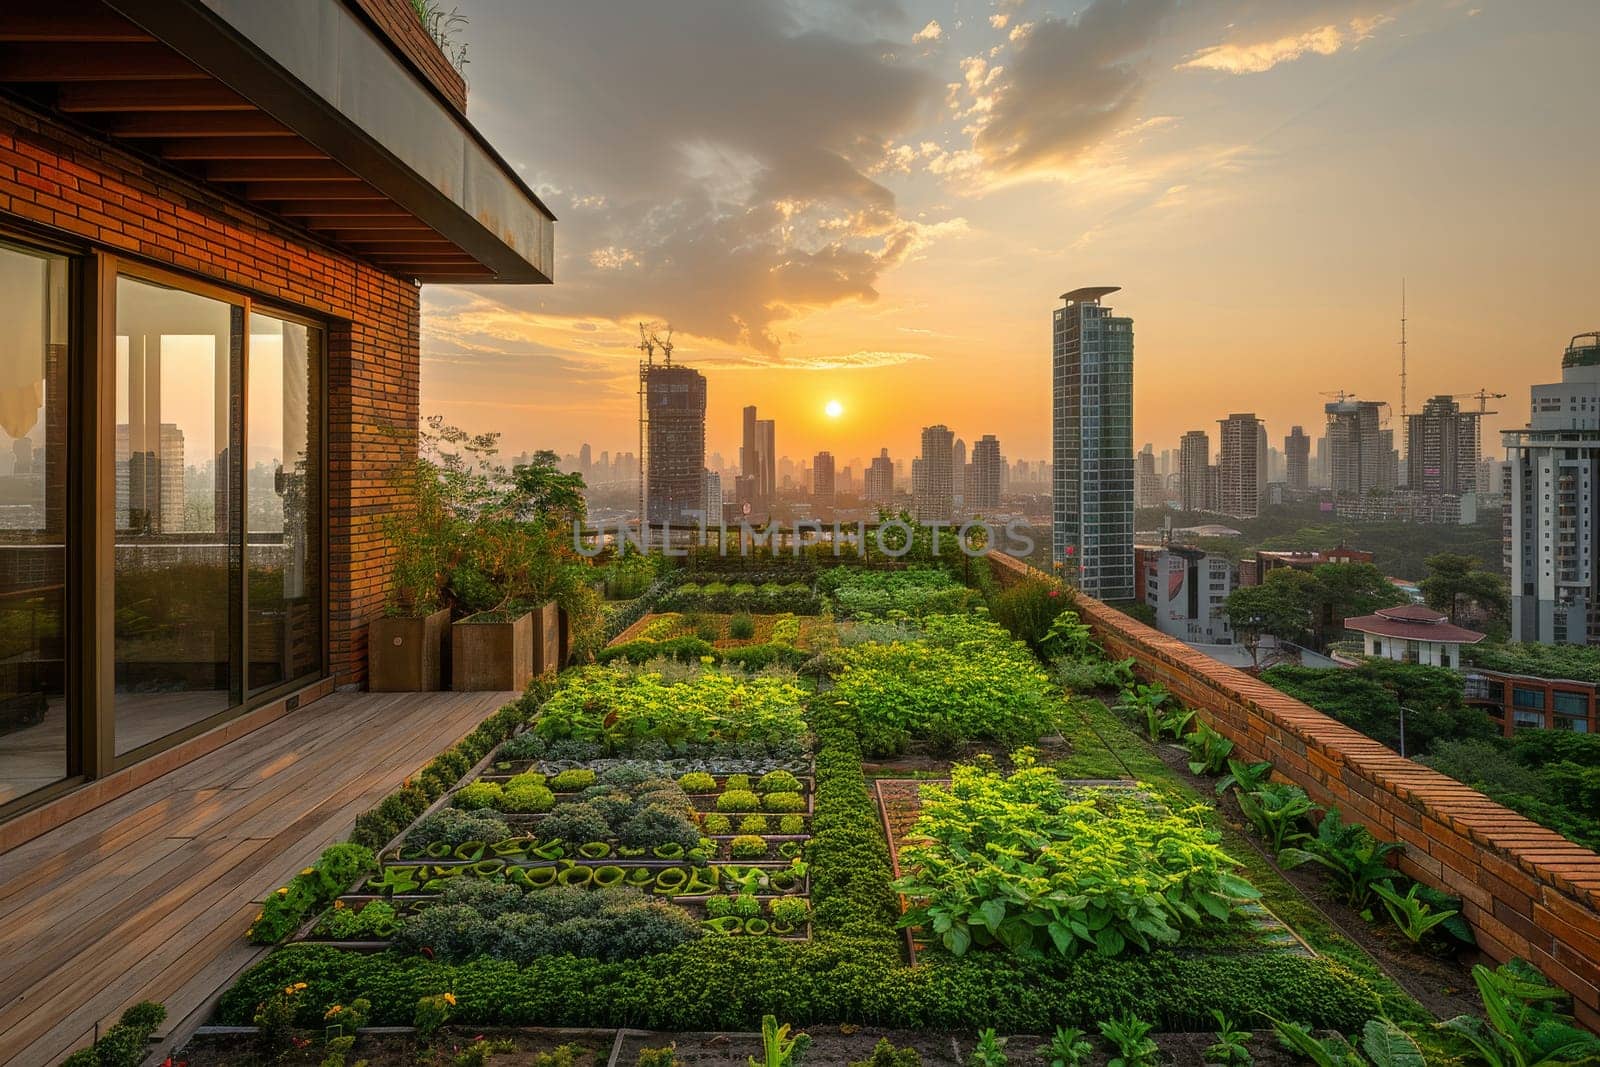 A rooftop garden with a view of the city and a sunset. The garden is filled with various plants and flowers, creating a peaceful and serene atmosphere. The sunset adds a warm